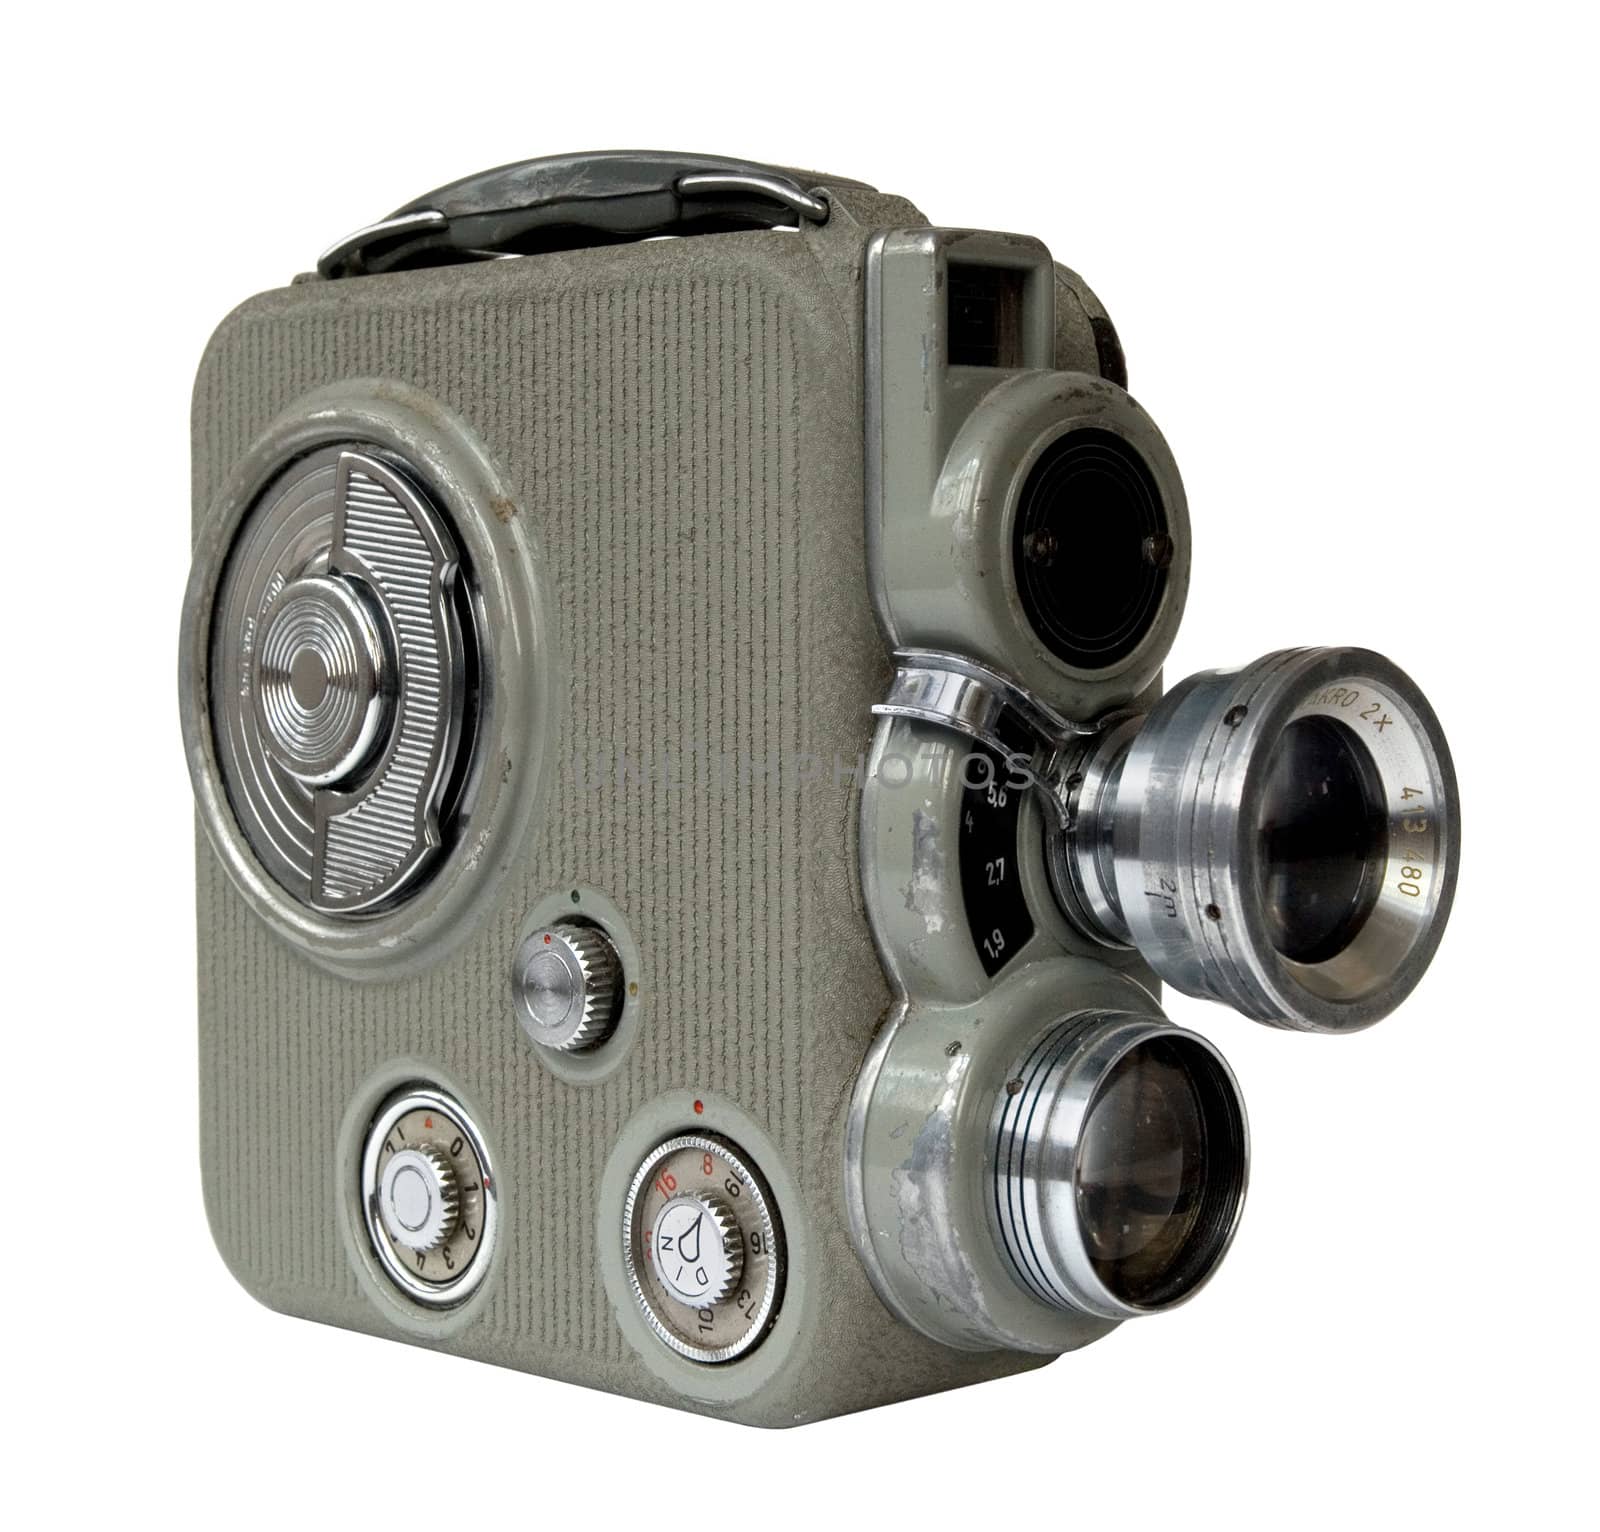 Old 8mm camera by daboost